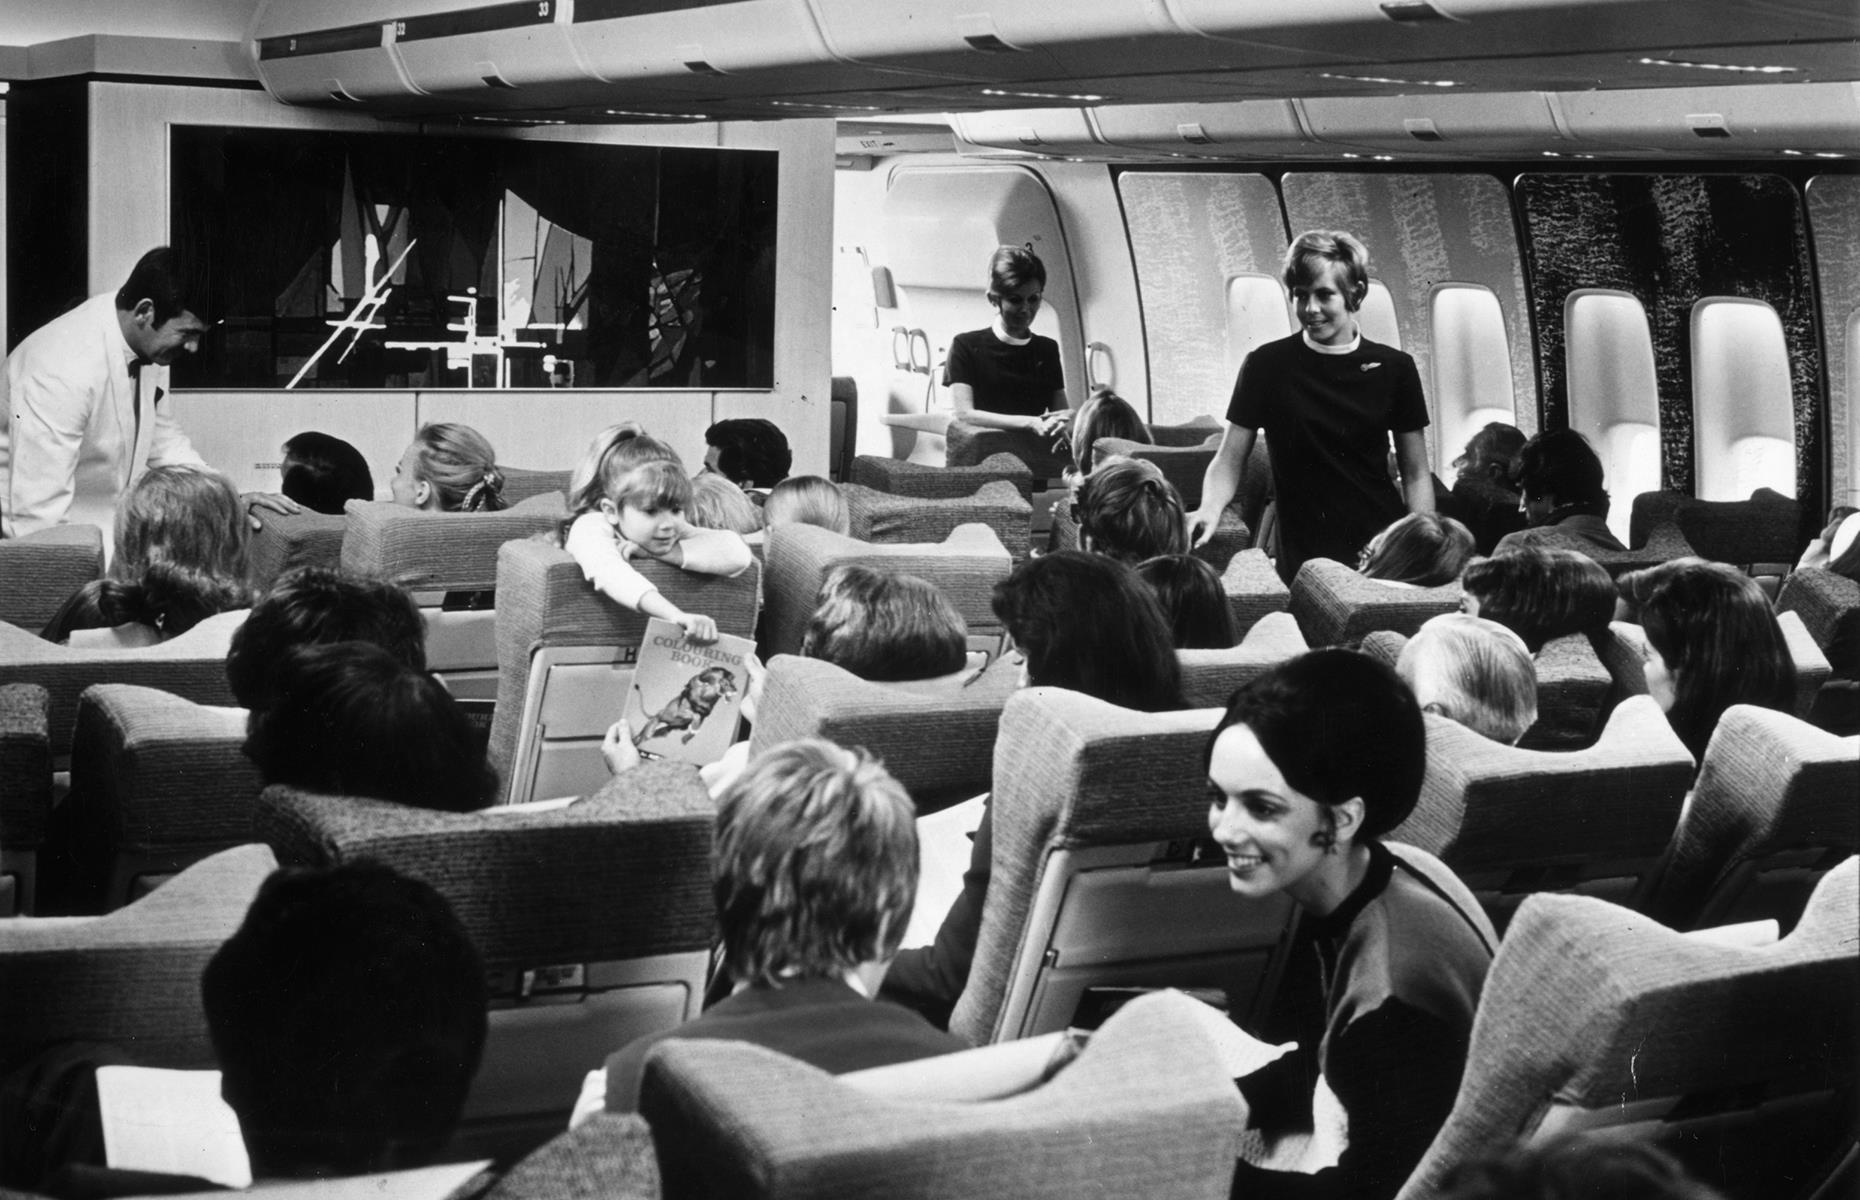 This was the first time that air travel was truly opening up to the masses. Since planes were larger, airlines were able to hold more passengers and therefore sell more tickets at a reduced price. Though flying still wasn't cheap, it was no longer only reserved for the super-rich. This 1970s shot shows the spacious cabin of a BOAC Boeing 747, filled with families, couples and other vacationers.